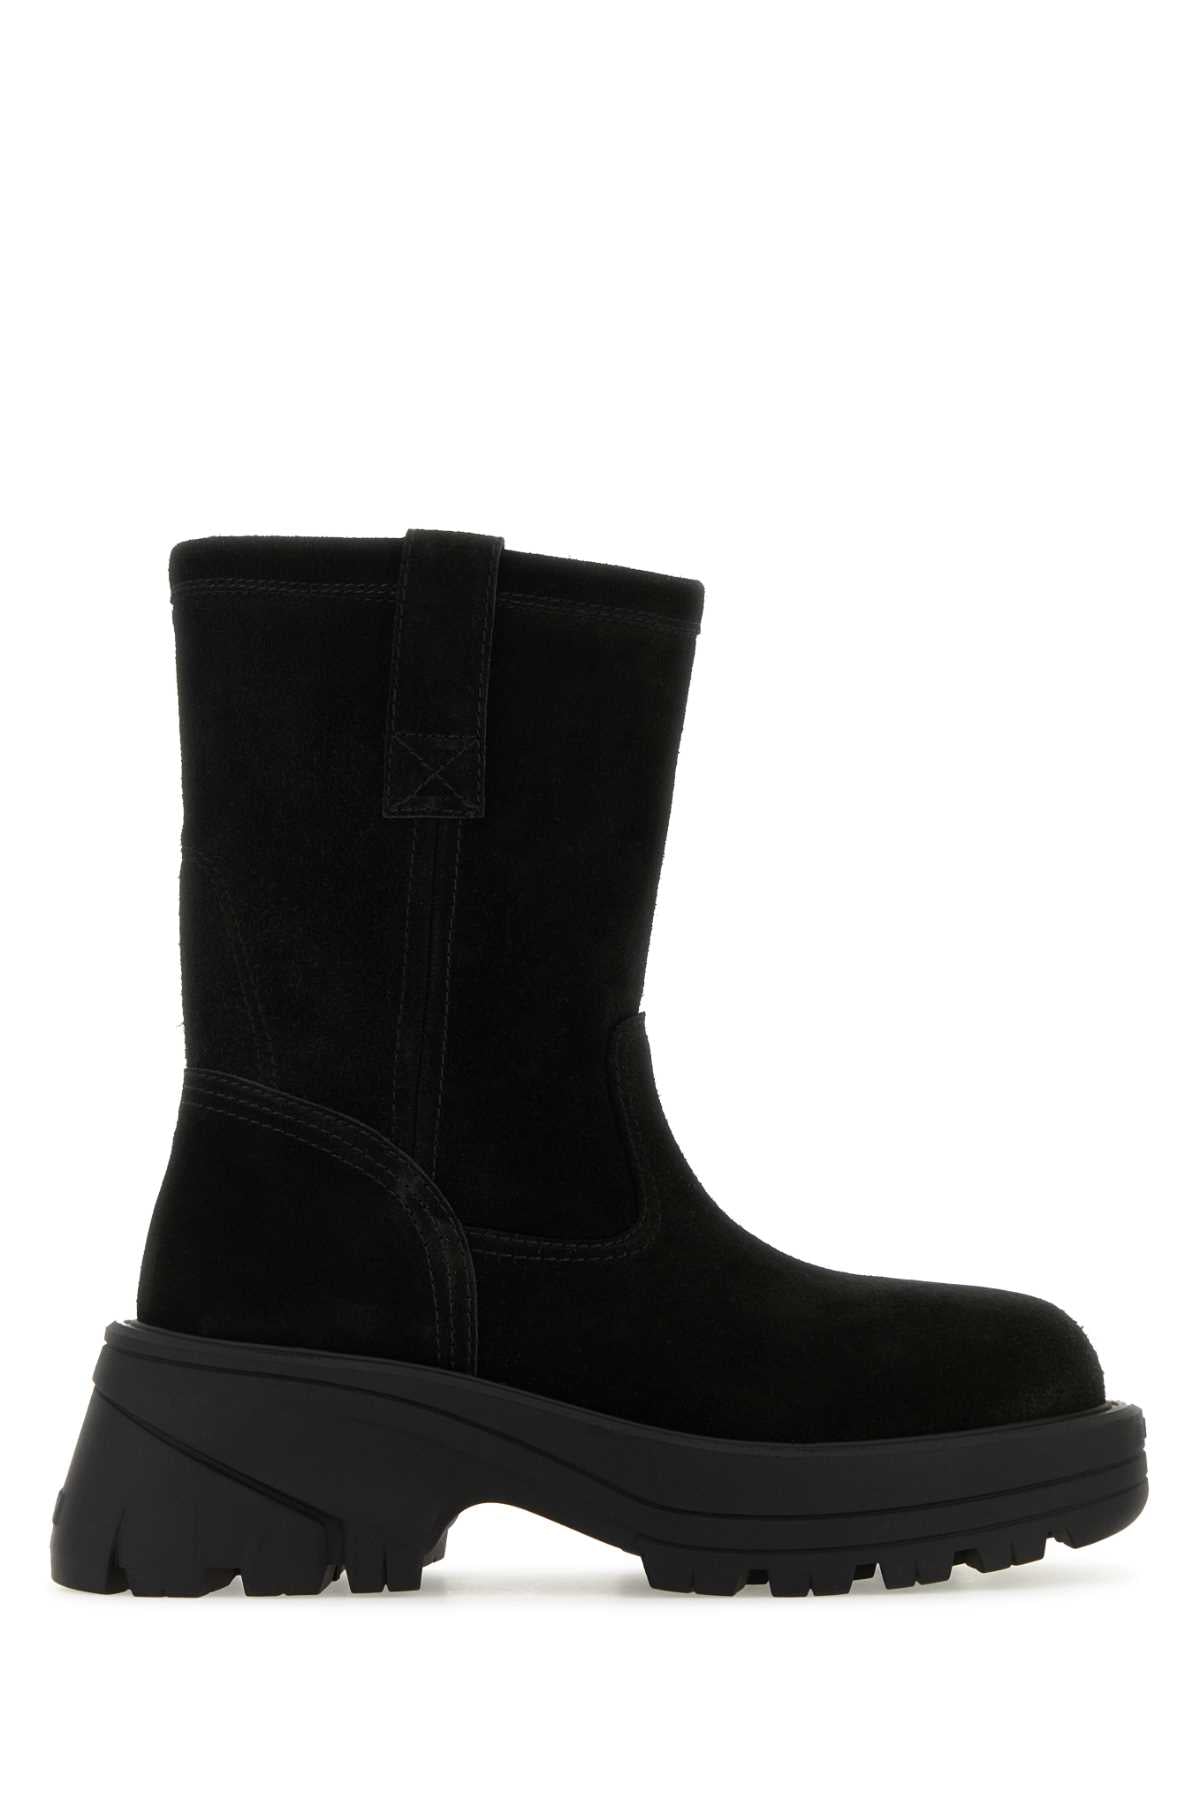 Alyx Black Suede Ankle Boots